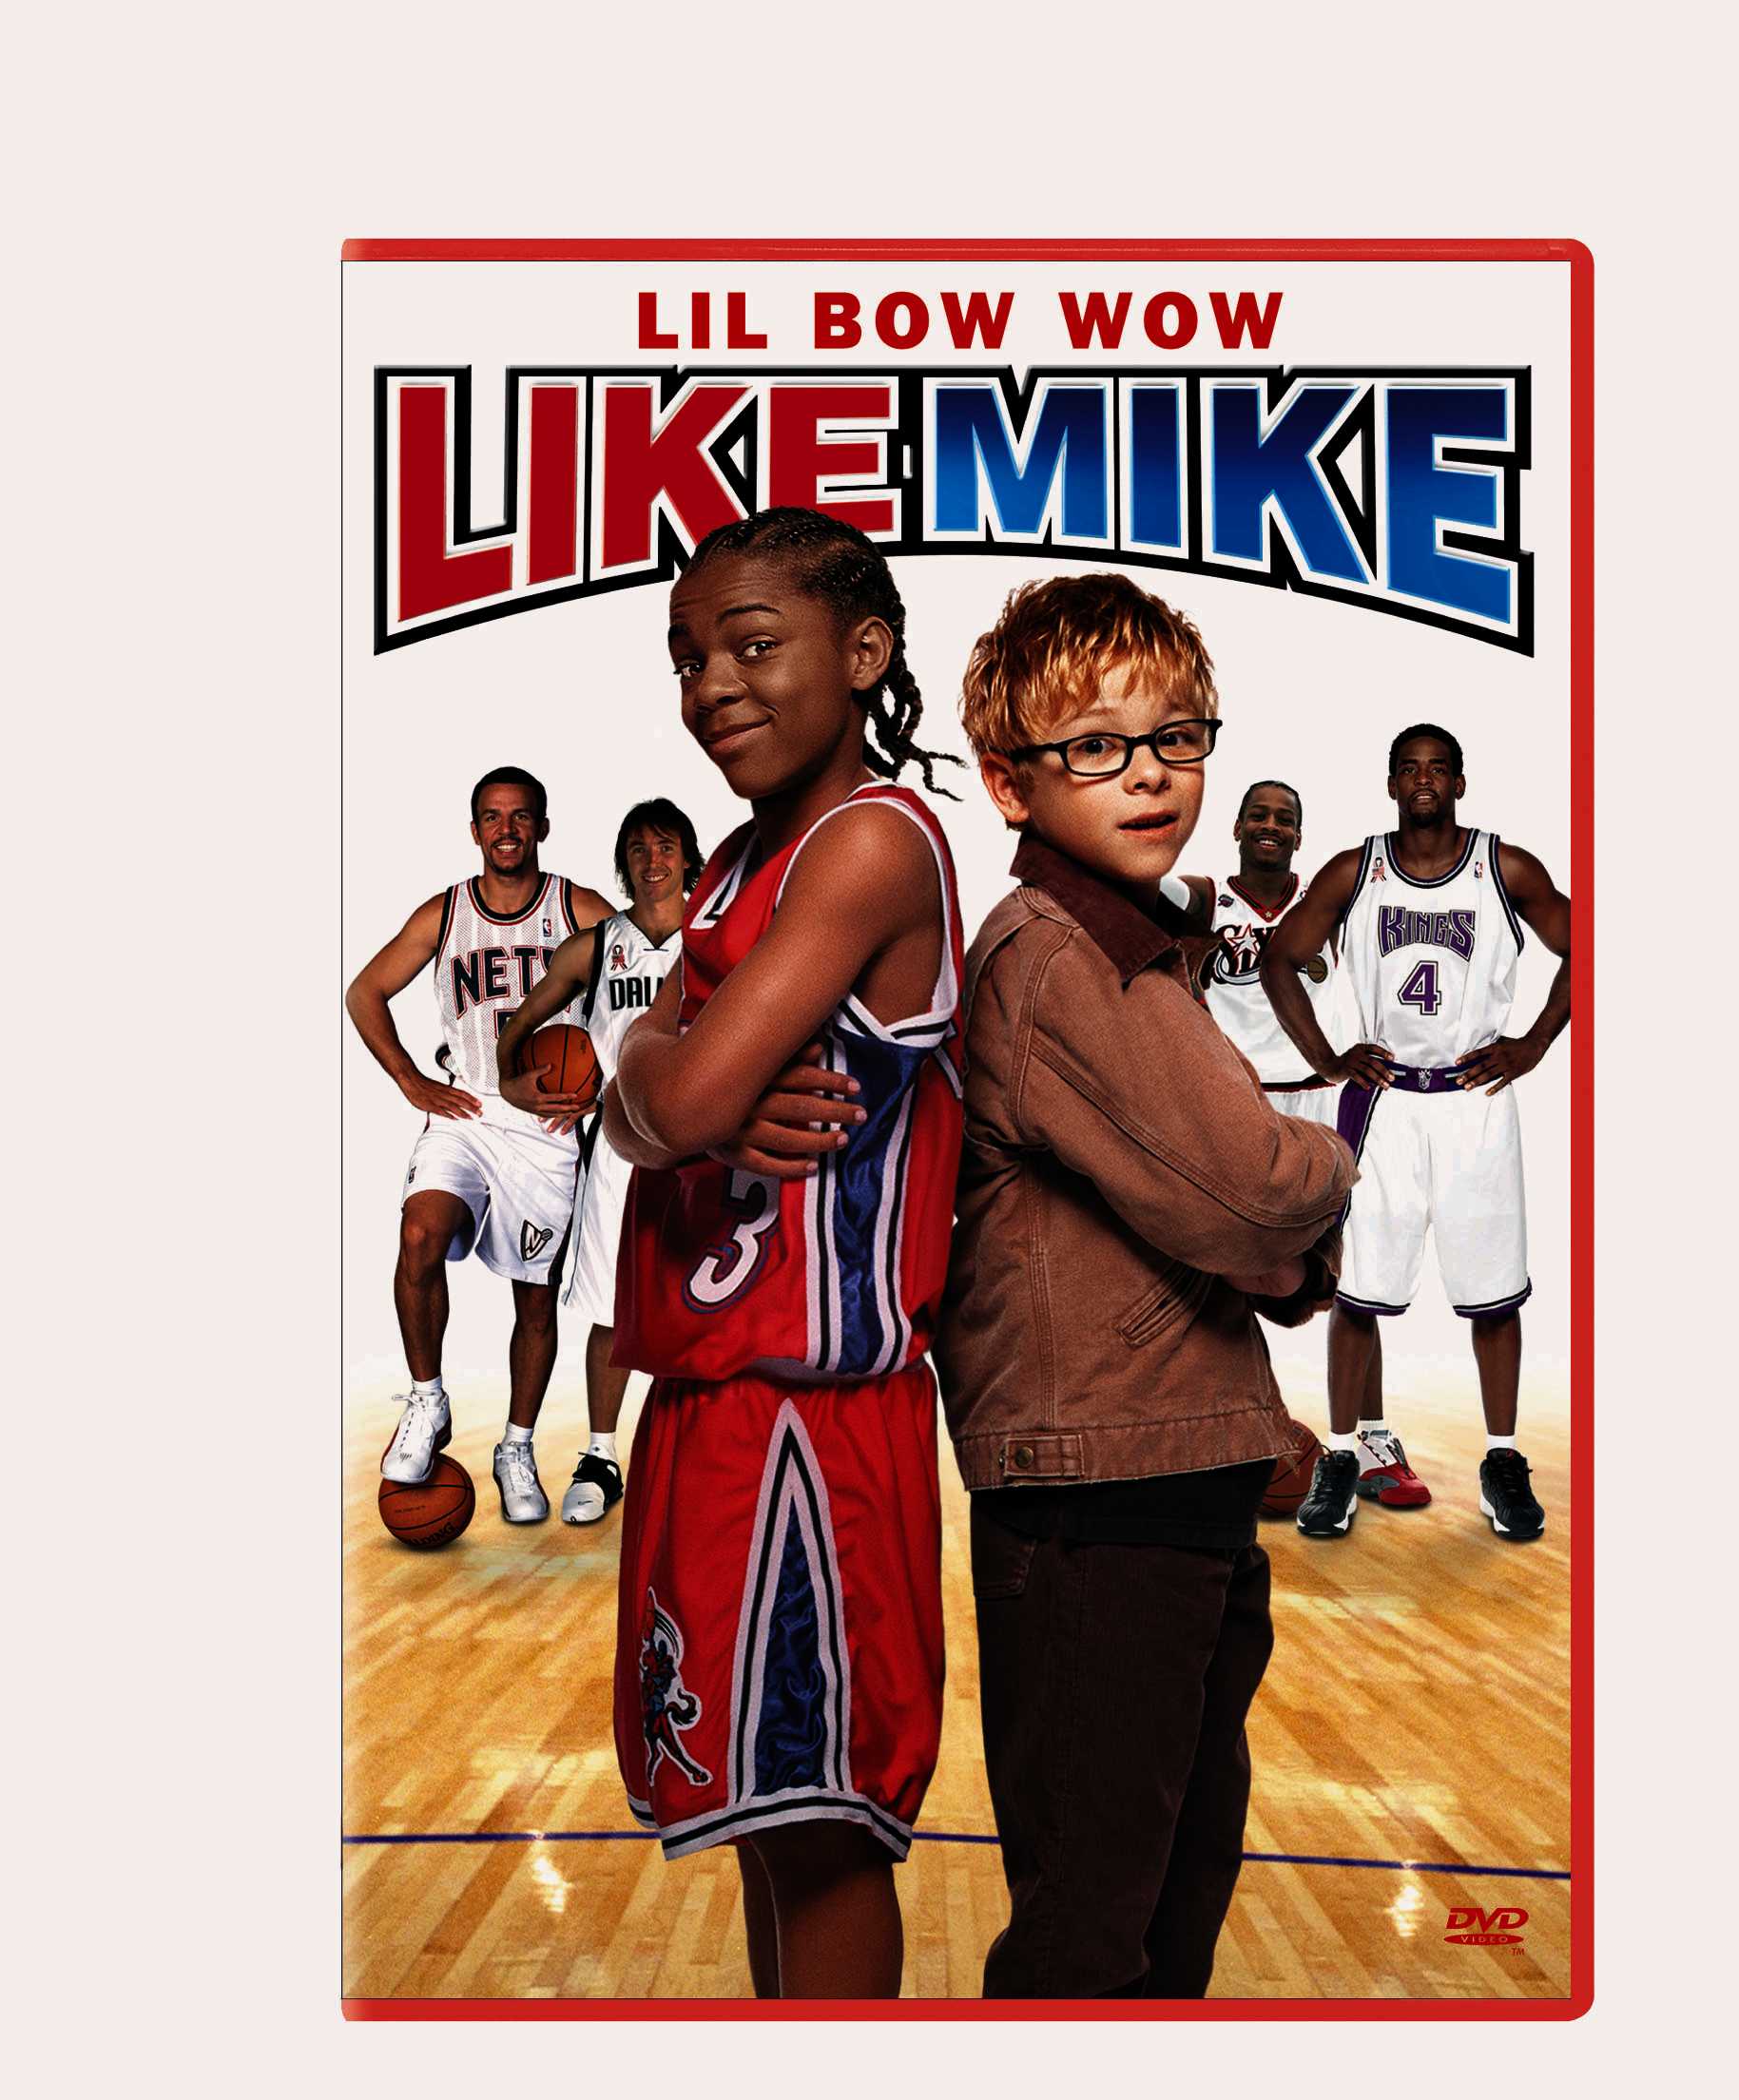 bow wow like mike songs